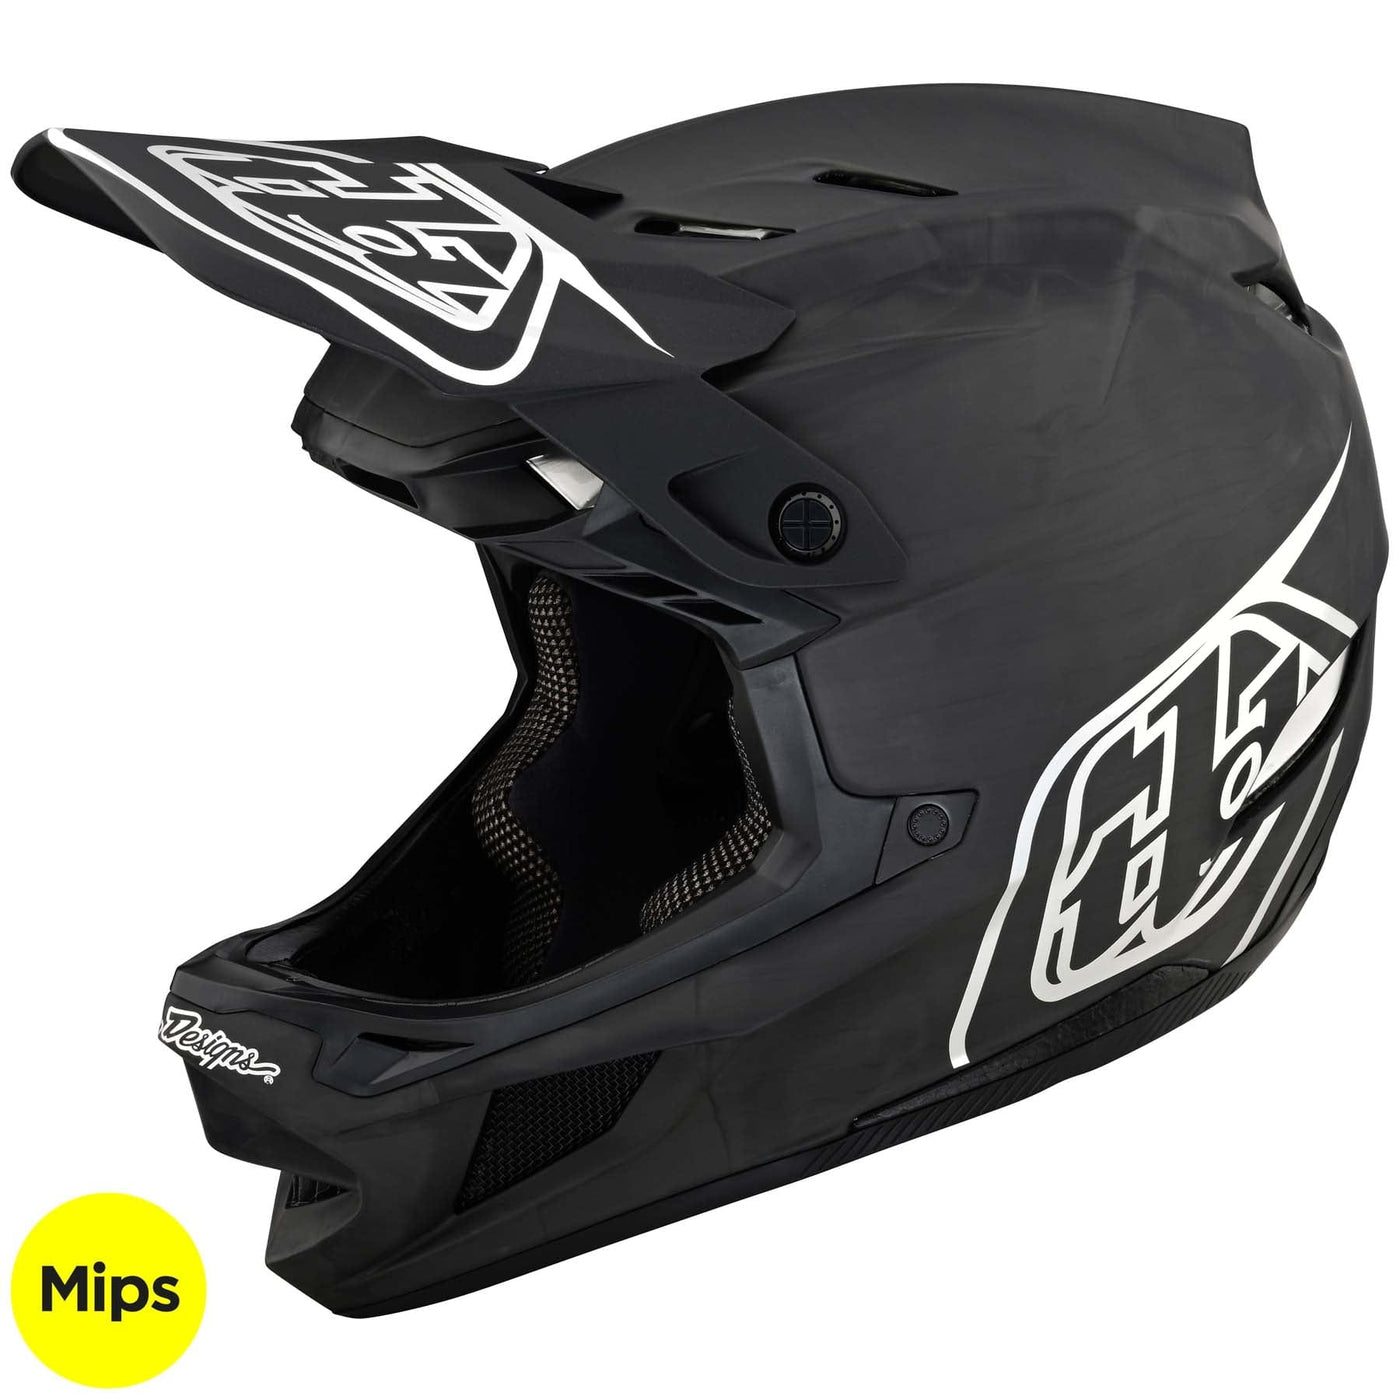 TLD D4 Carbon MIPS Helmet Stealth - Black/Silver 8Lines Shop - Fast Shipping